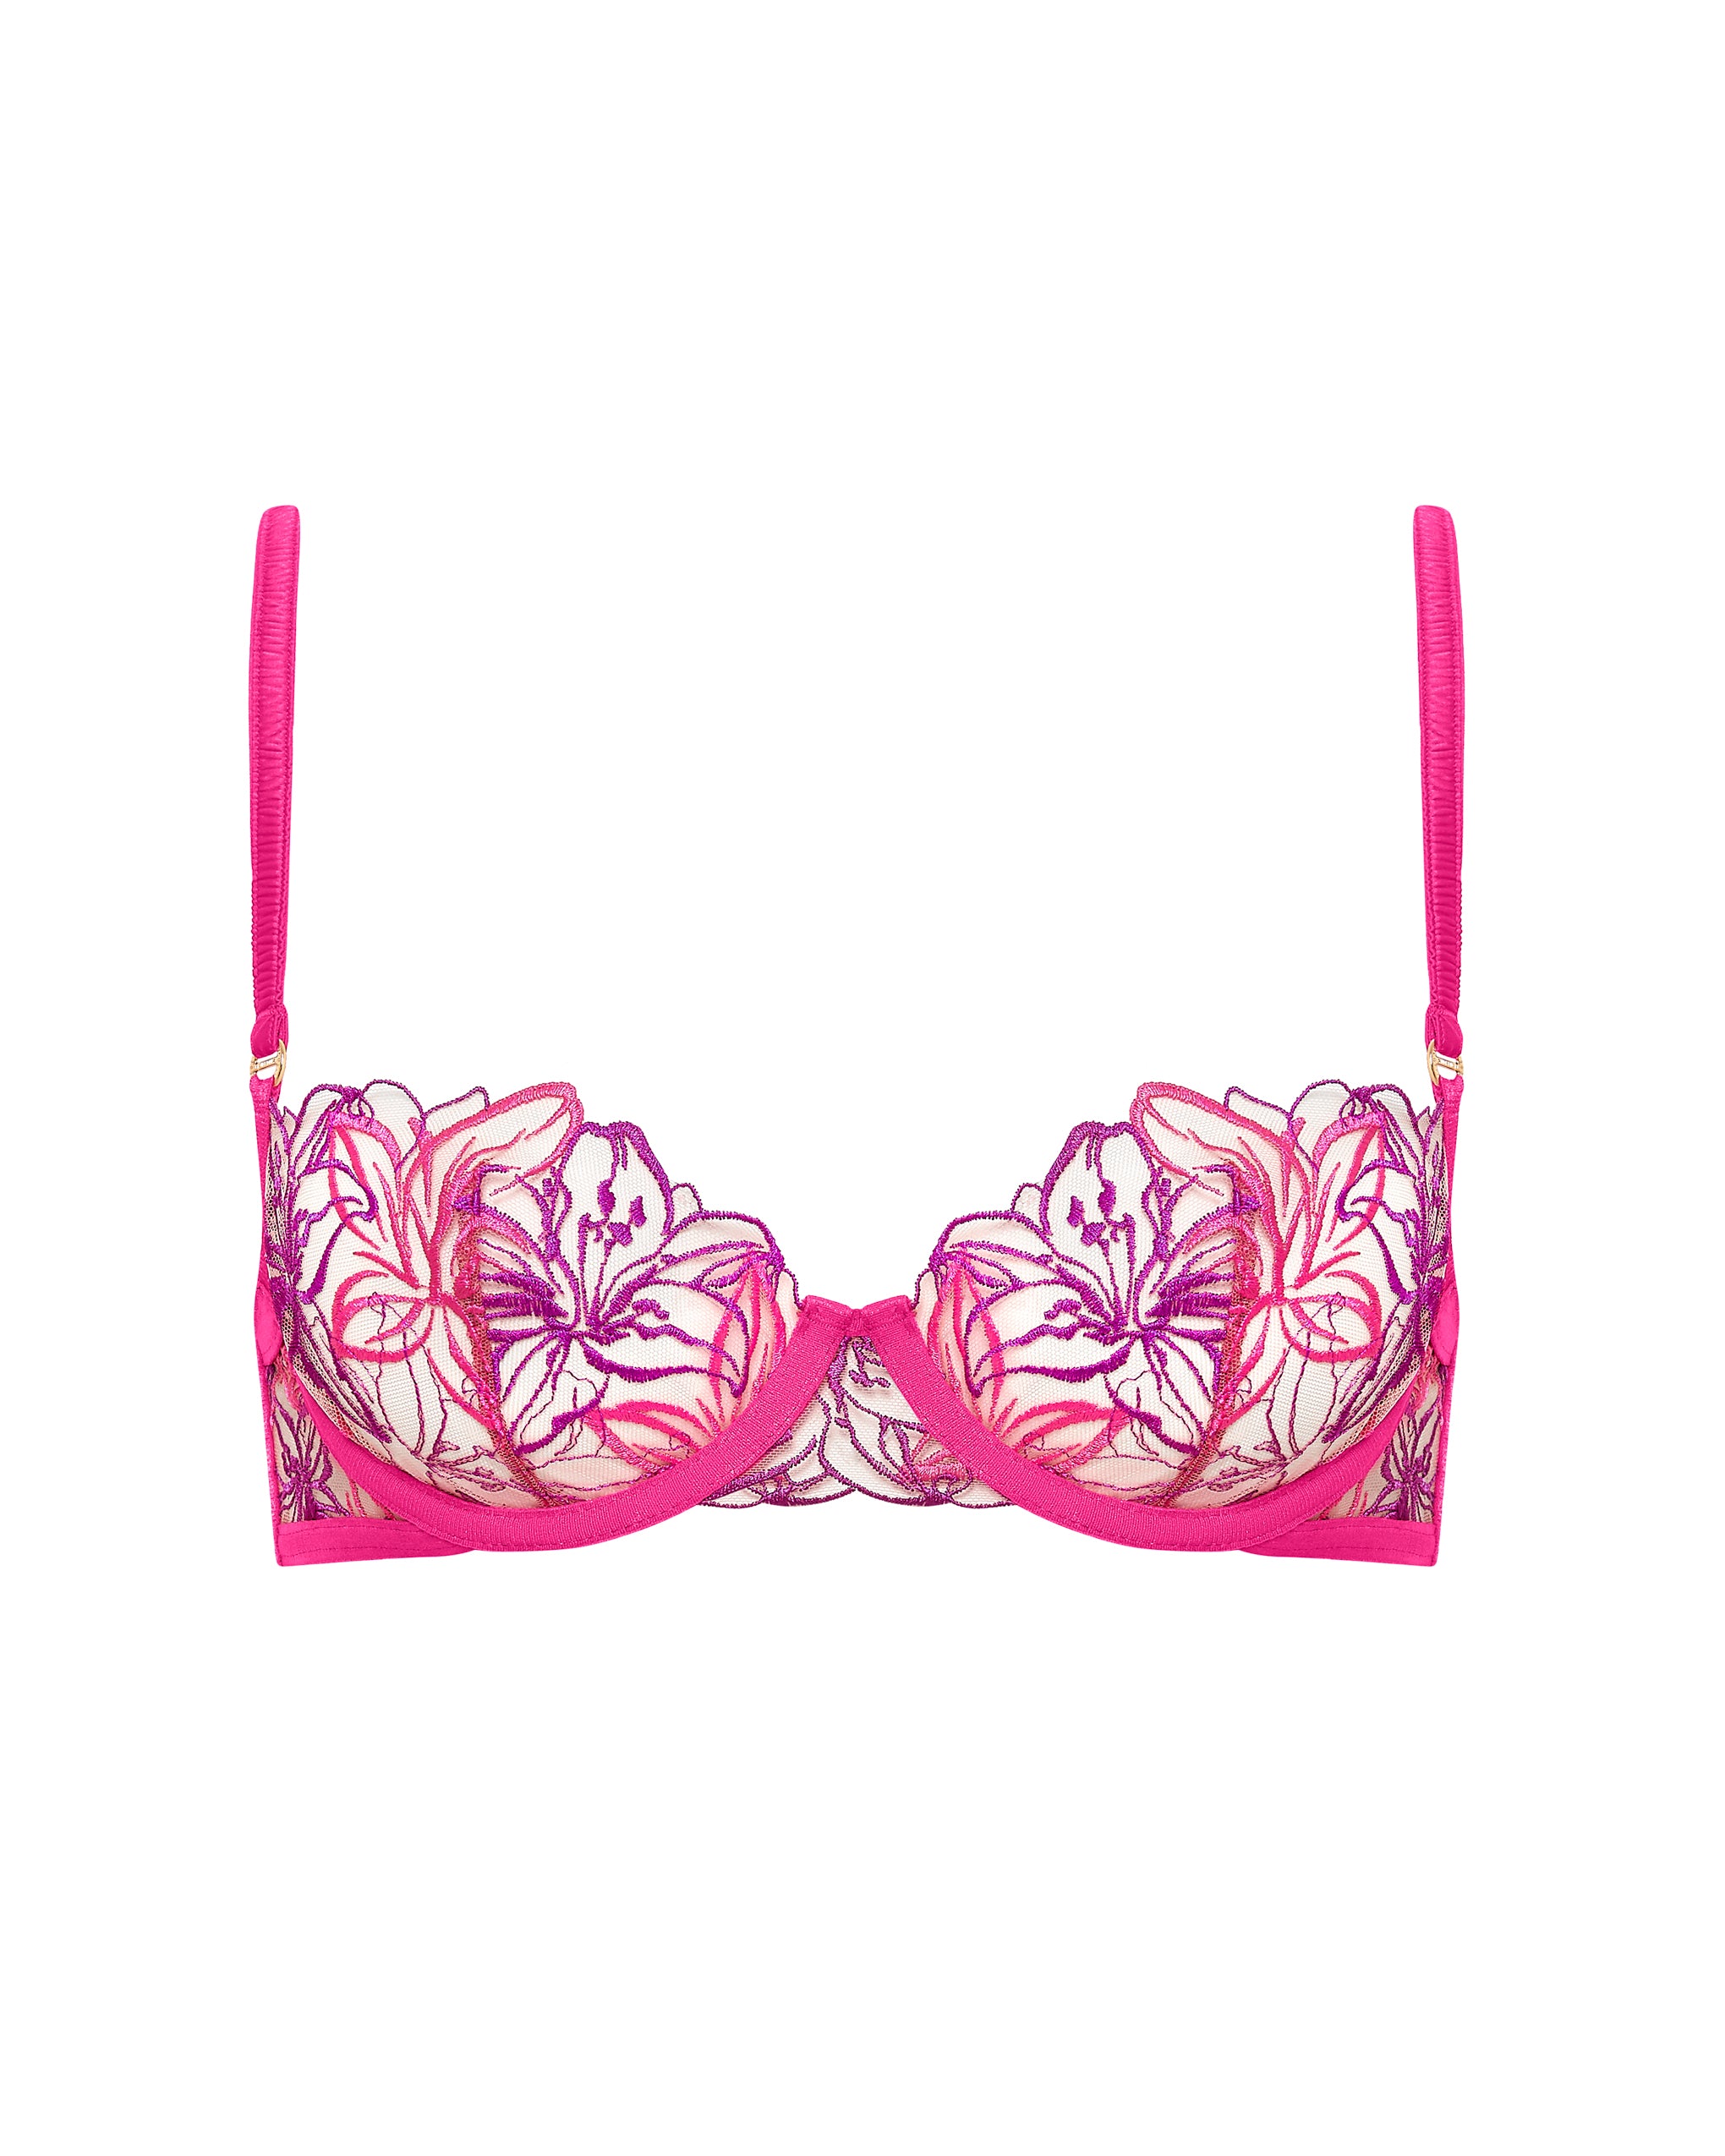 Bluebella Lilly Bra Fuchsia Pink/Bright Violet/Sheer product